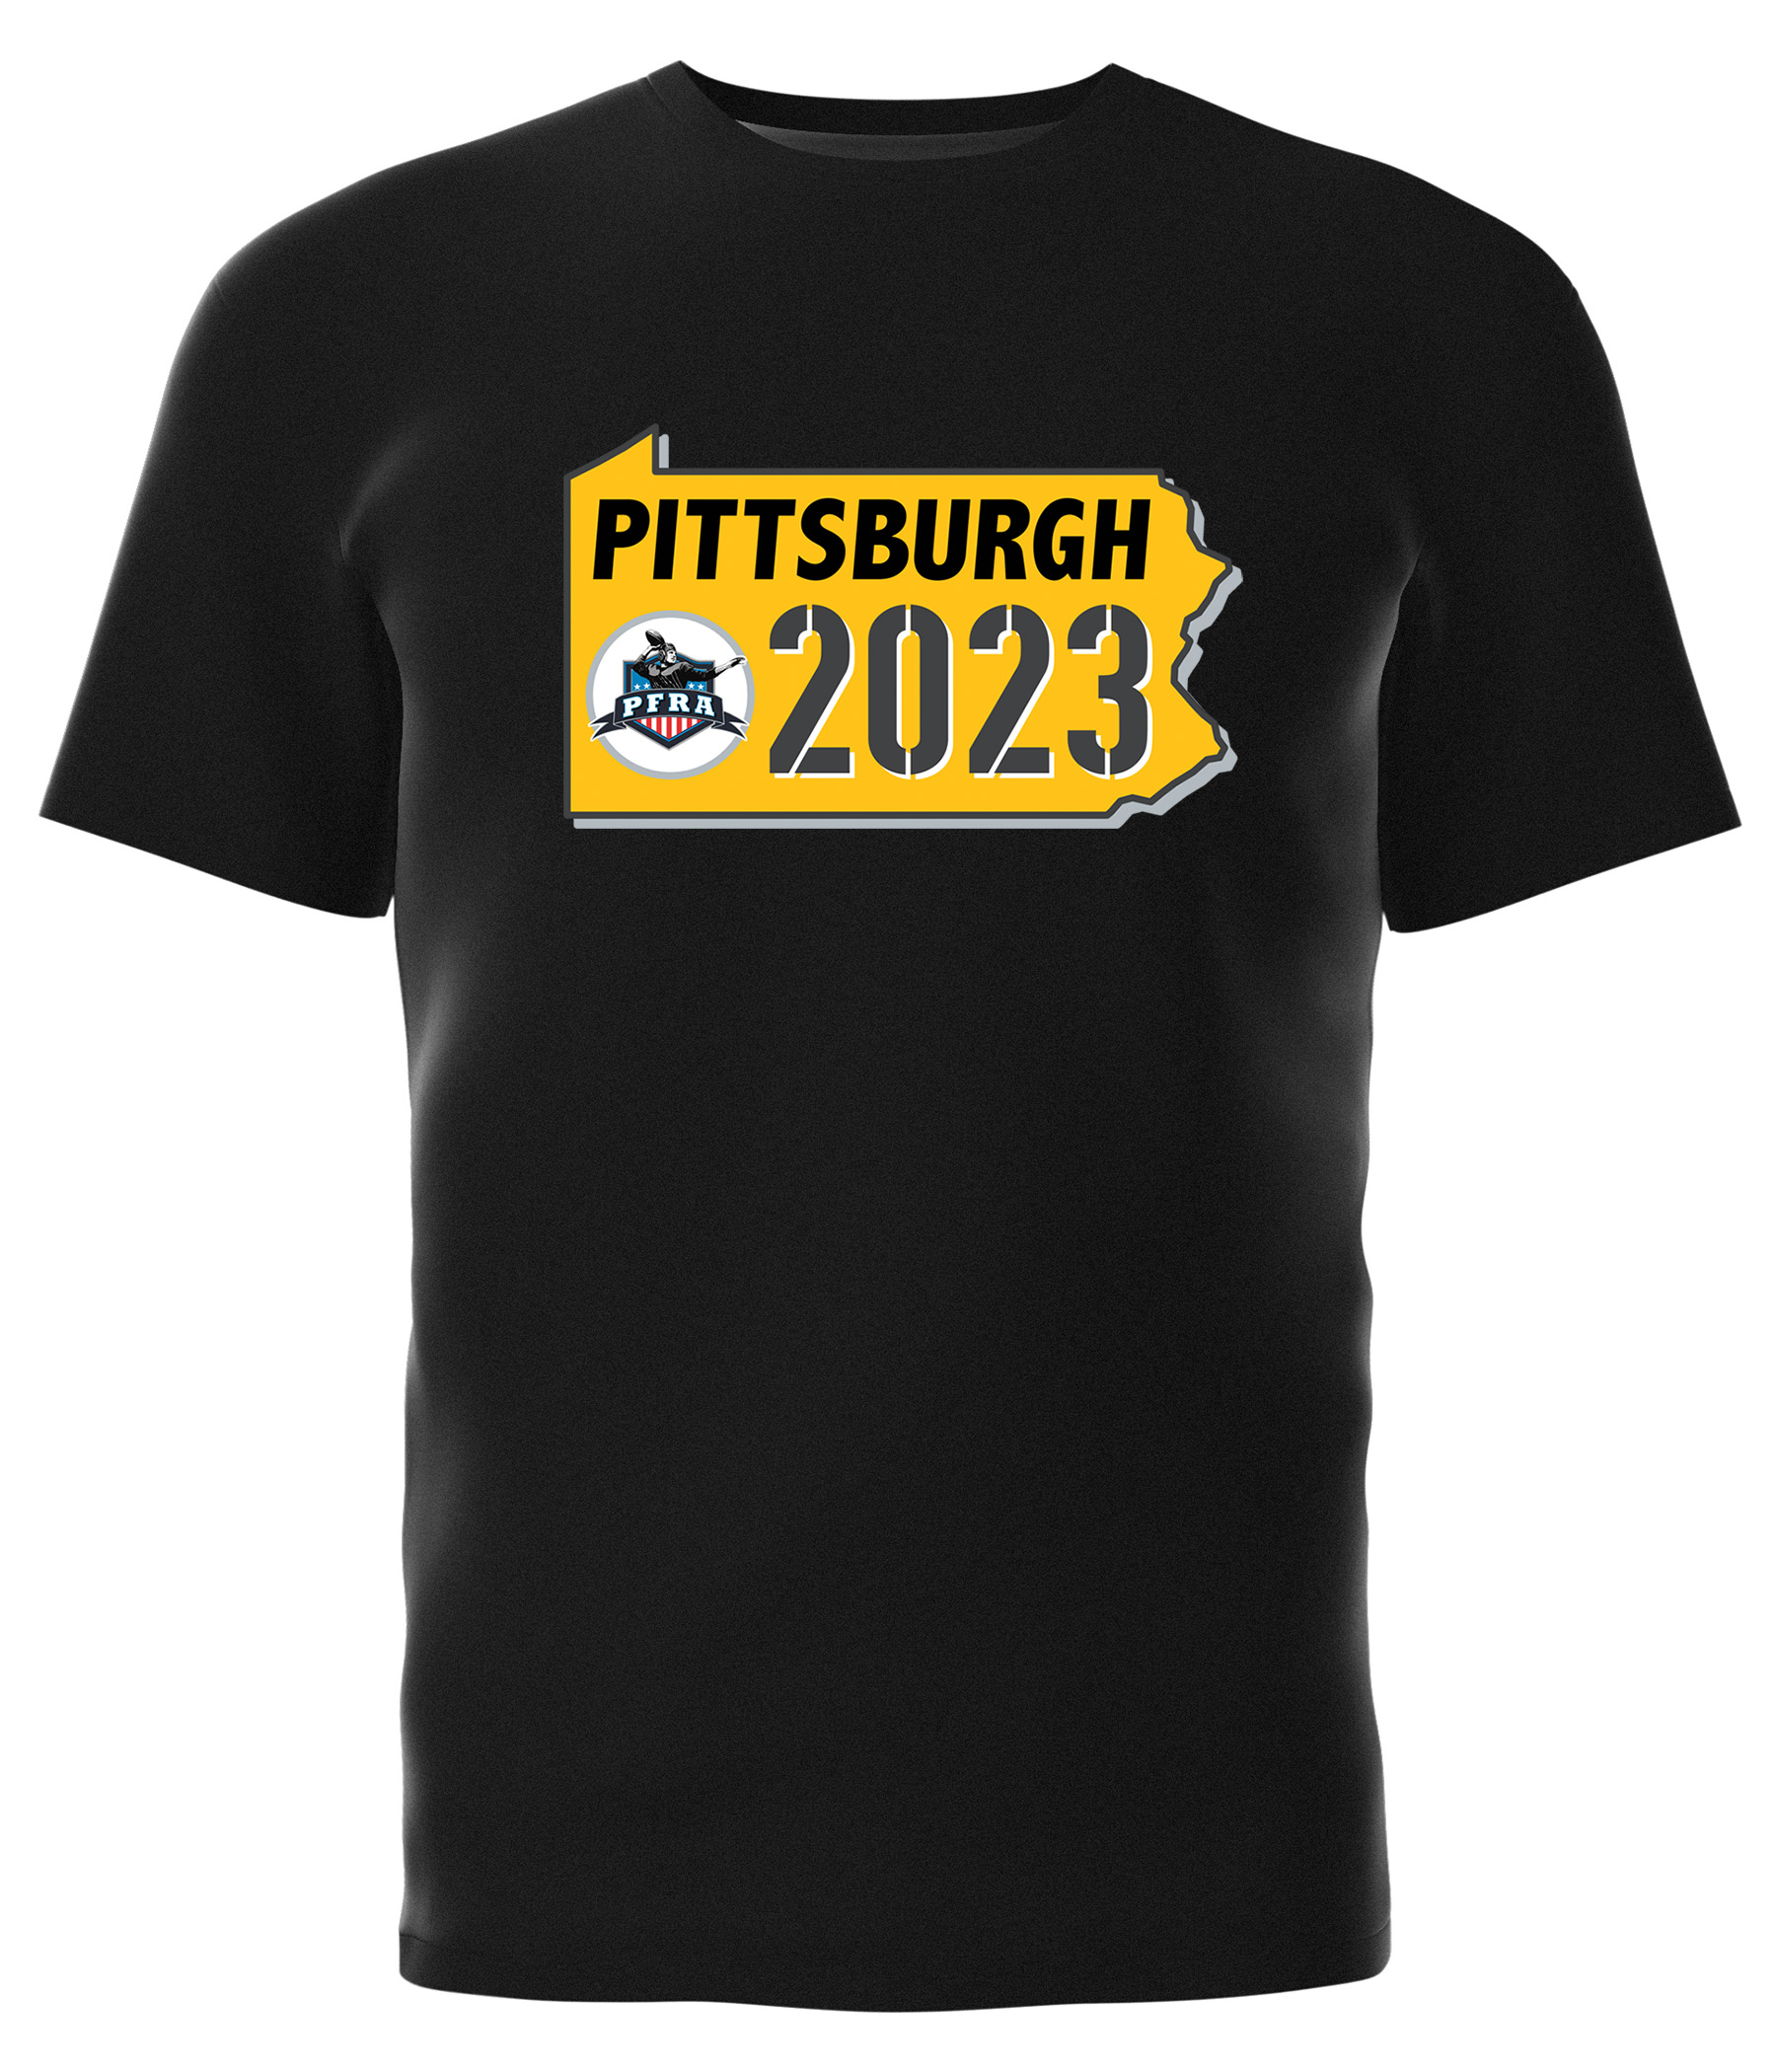 Click to order the 2023 Convention T-Shirt